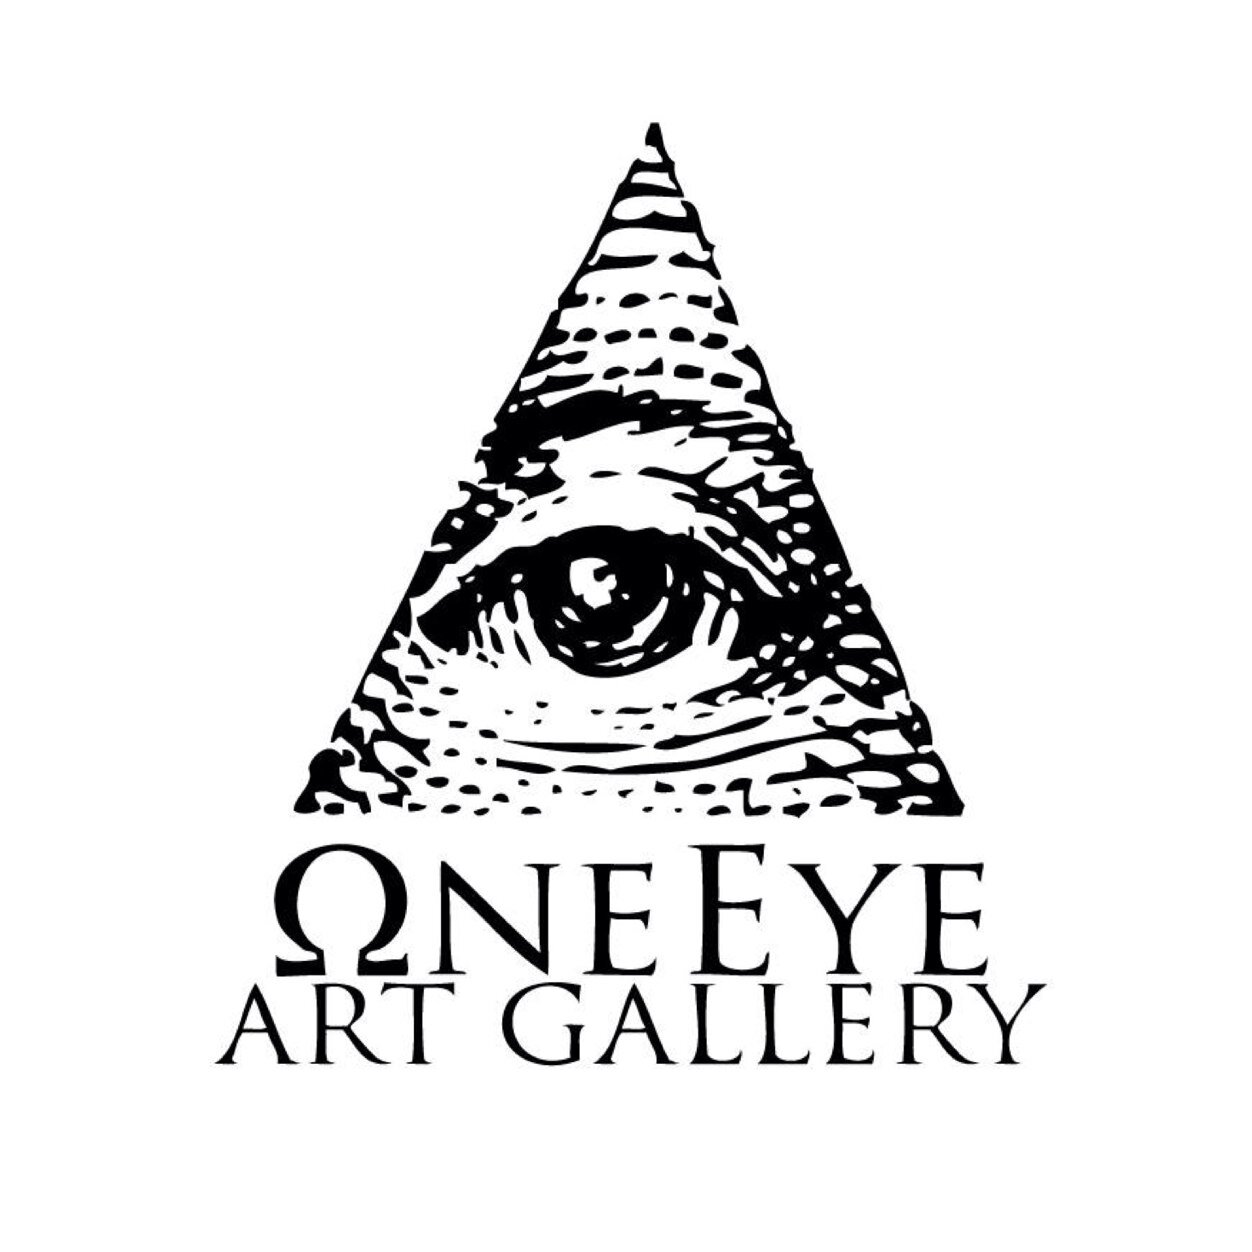 One eye is something as fun and free spirited as a pop up art gallery! Our next exhibit is based in Larvik, Norway on 12-18th of May.